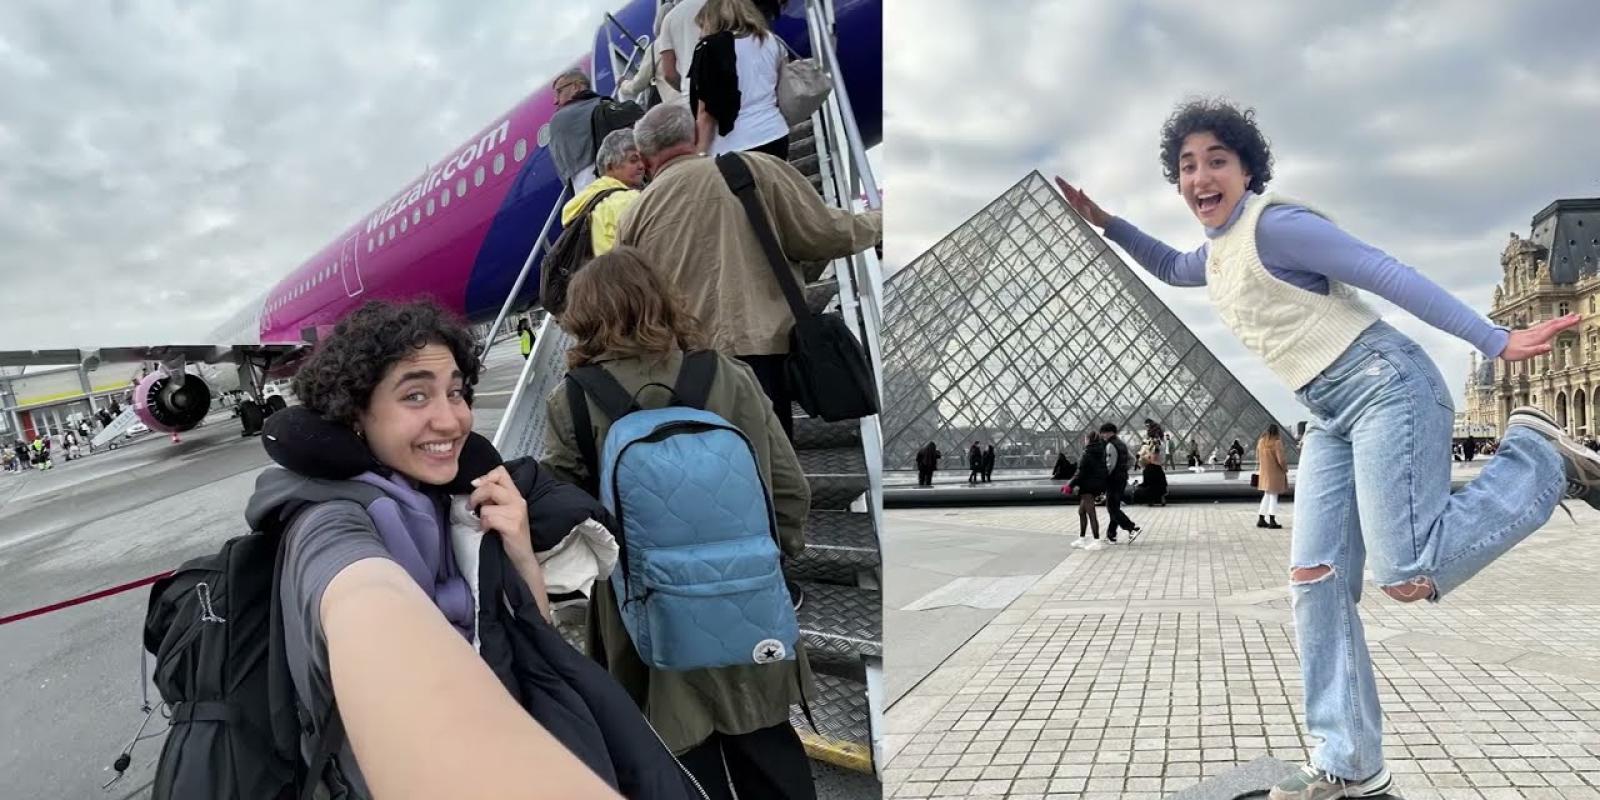 Female standing at the bottom of plane stairs in one photo and standing next to a glass pyramid in the second photo